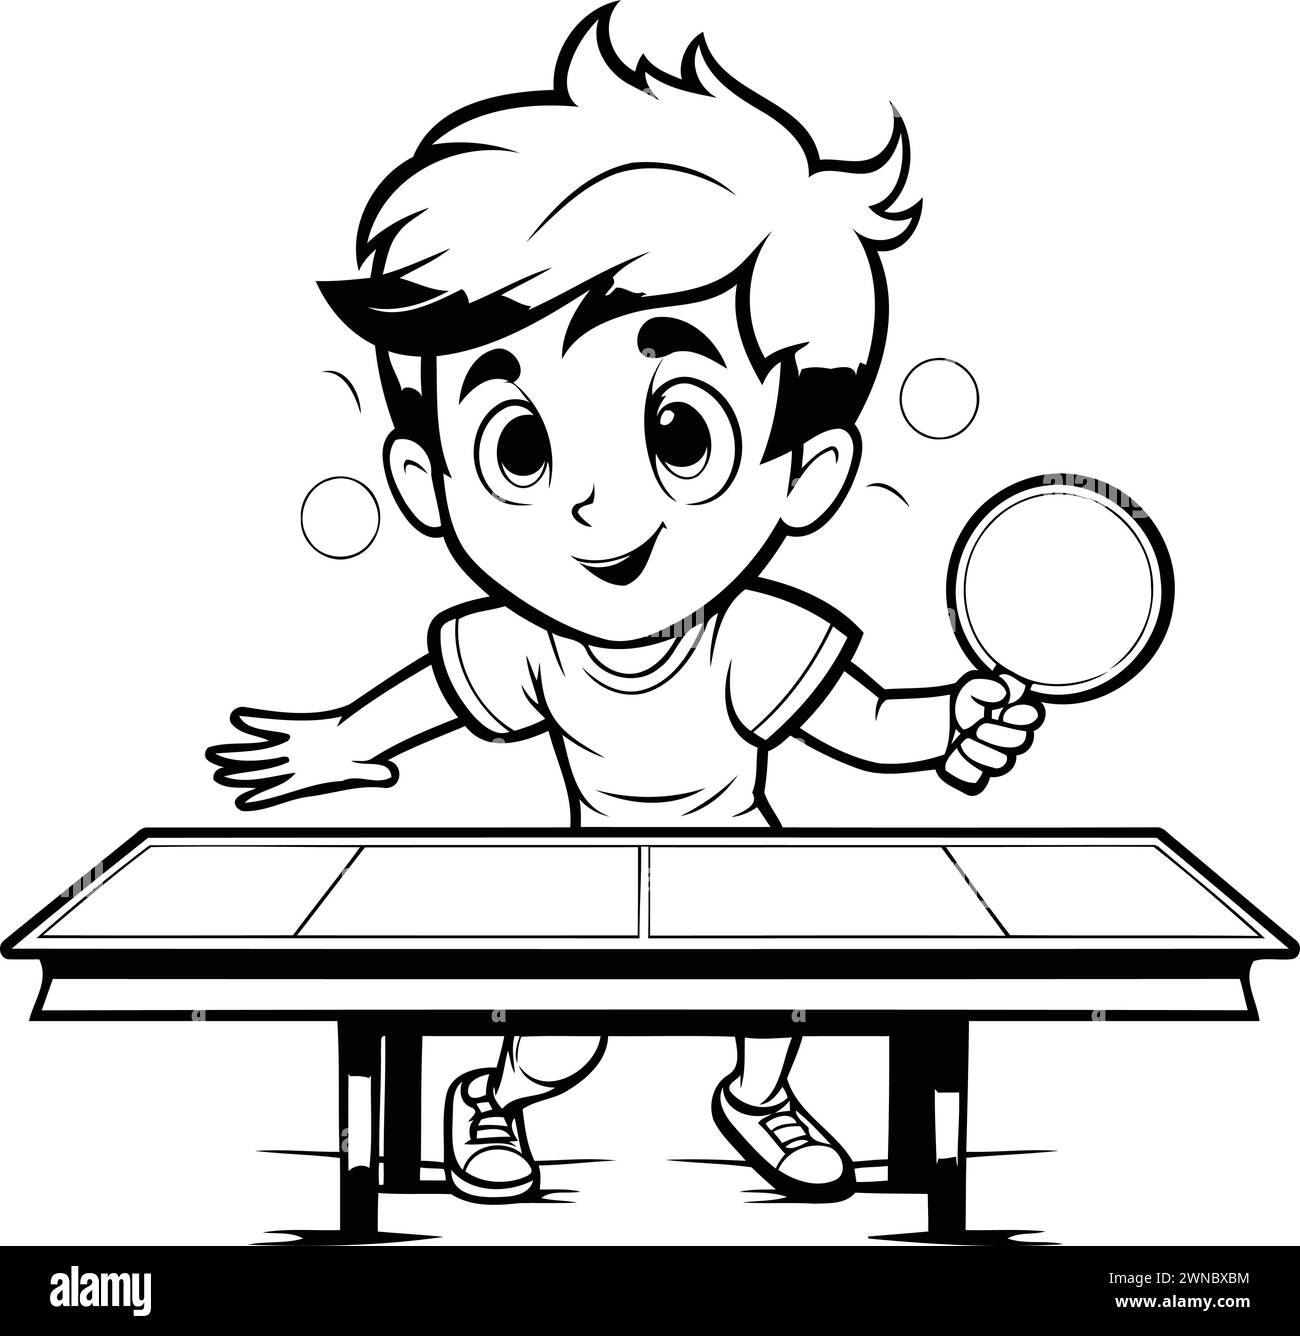 Boy Playing Table Tennis - Black and White Cartoon Illustration. Vector Stock Vector